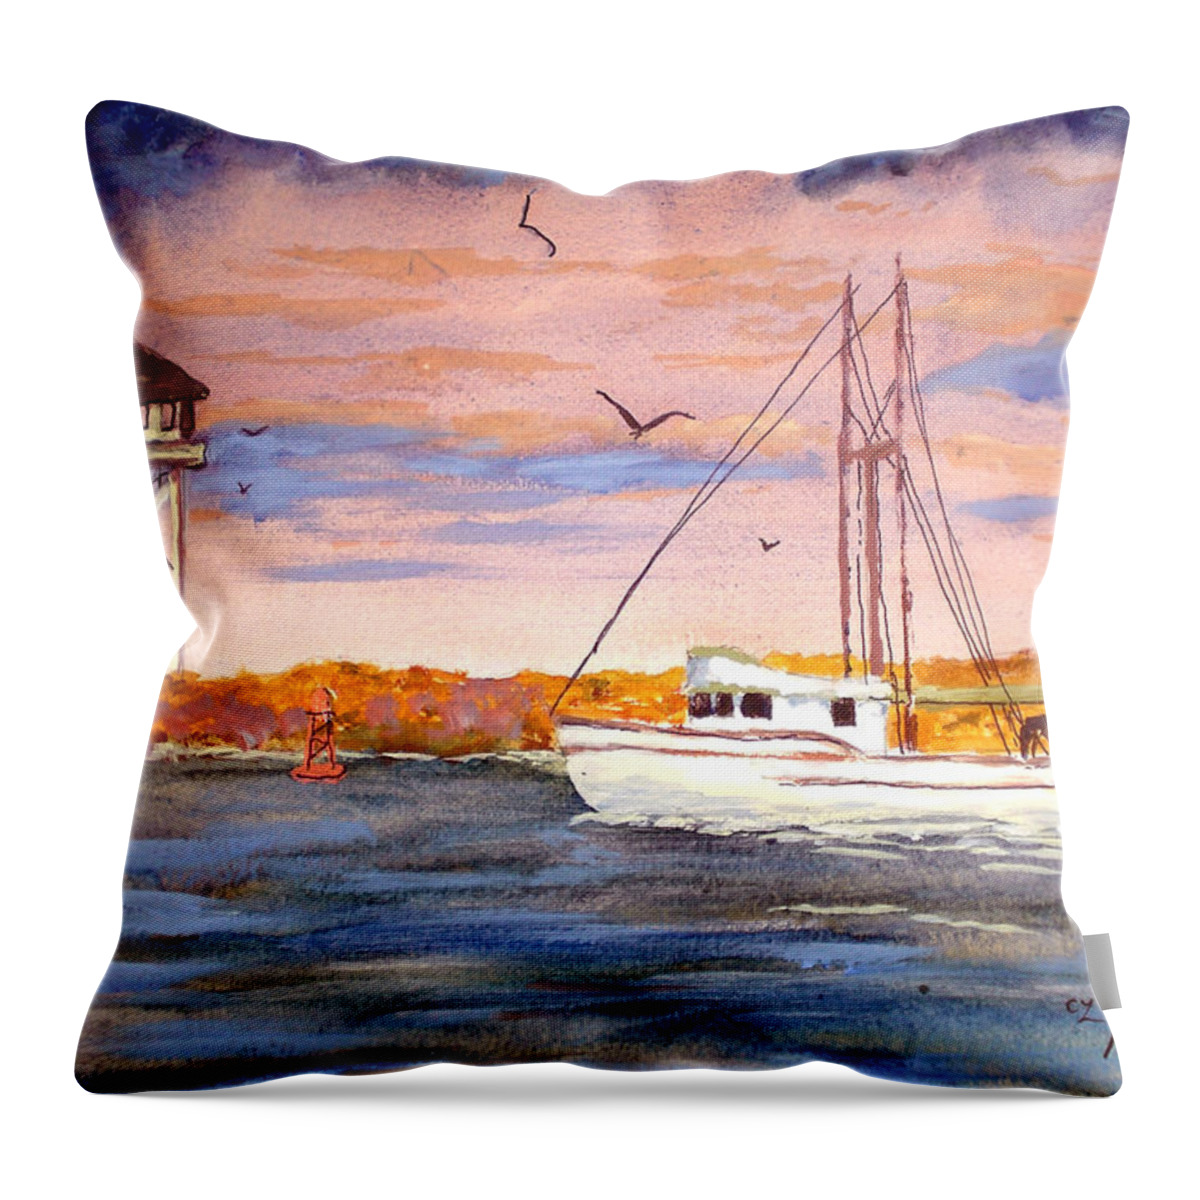 Fishing Boat Throw Pillow featuring the painting Crossing The Tillamook Bay Bar by Chriss Pagani